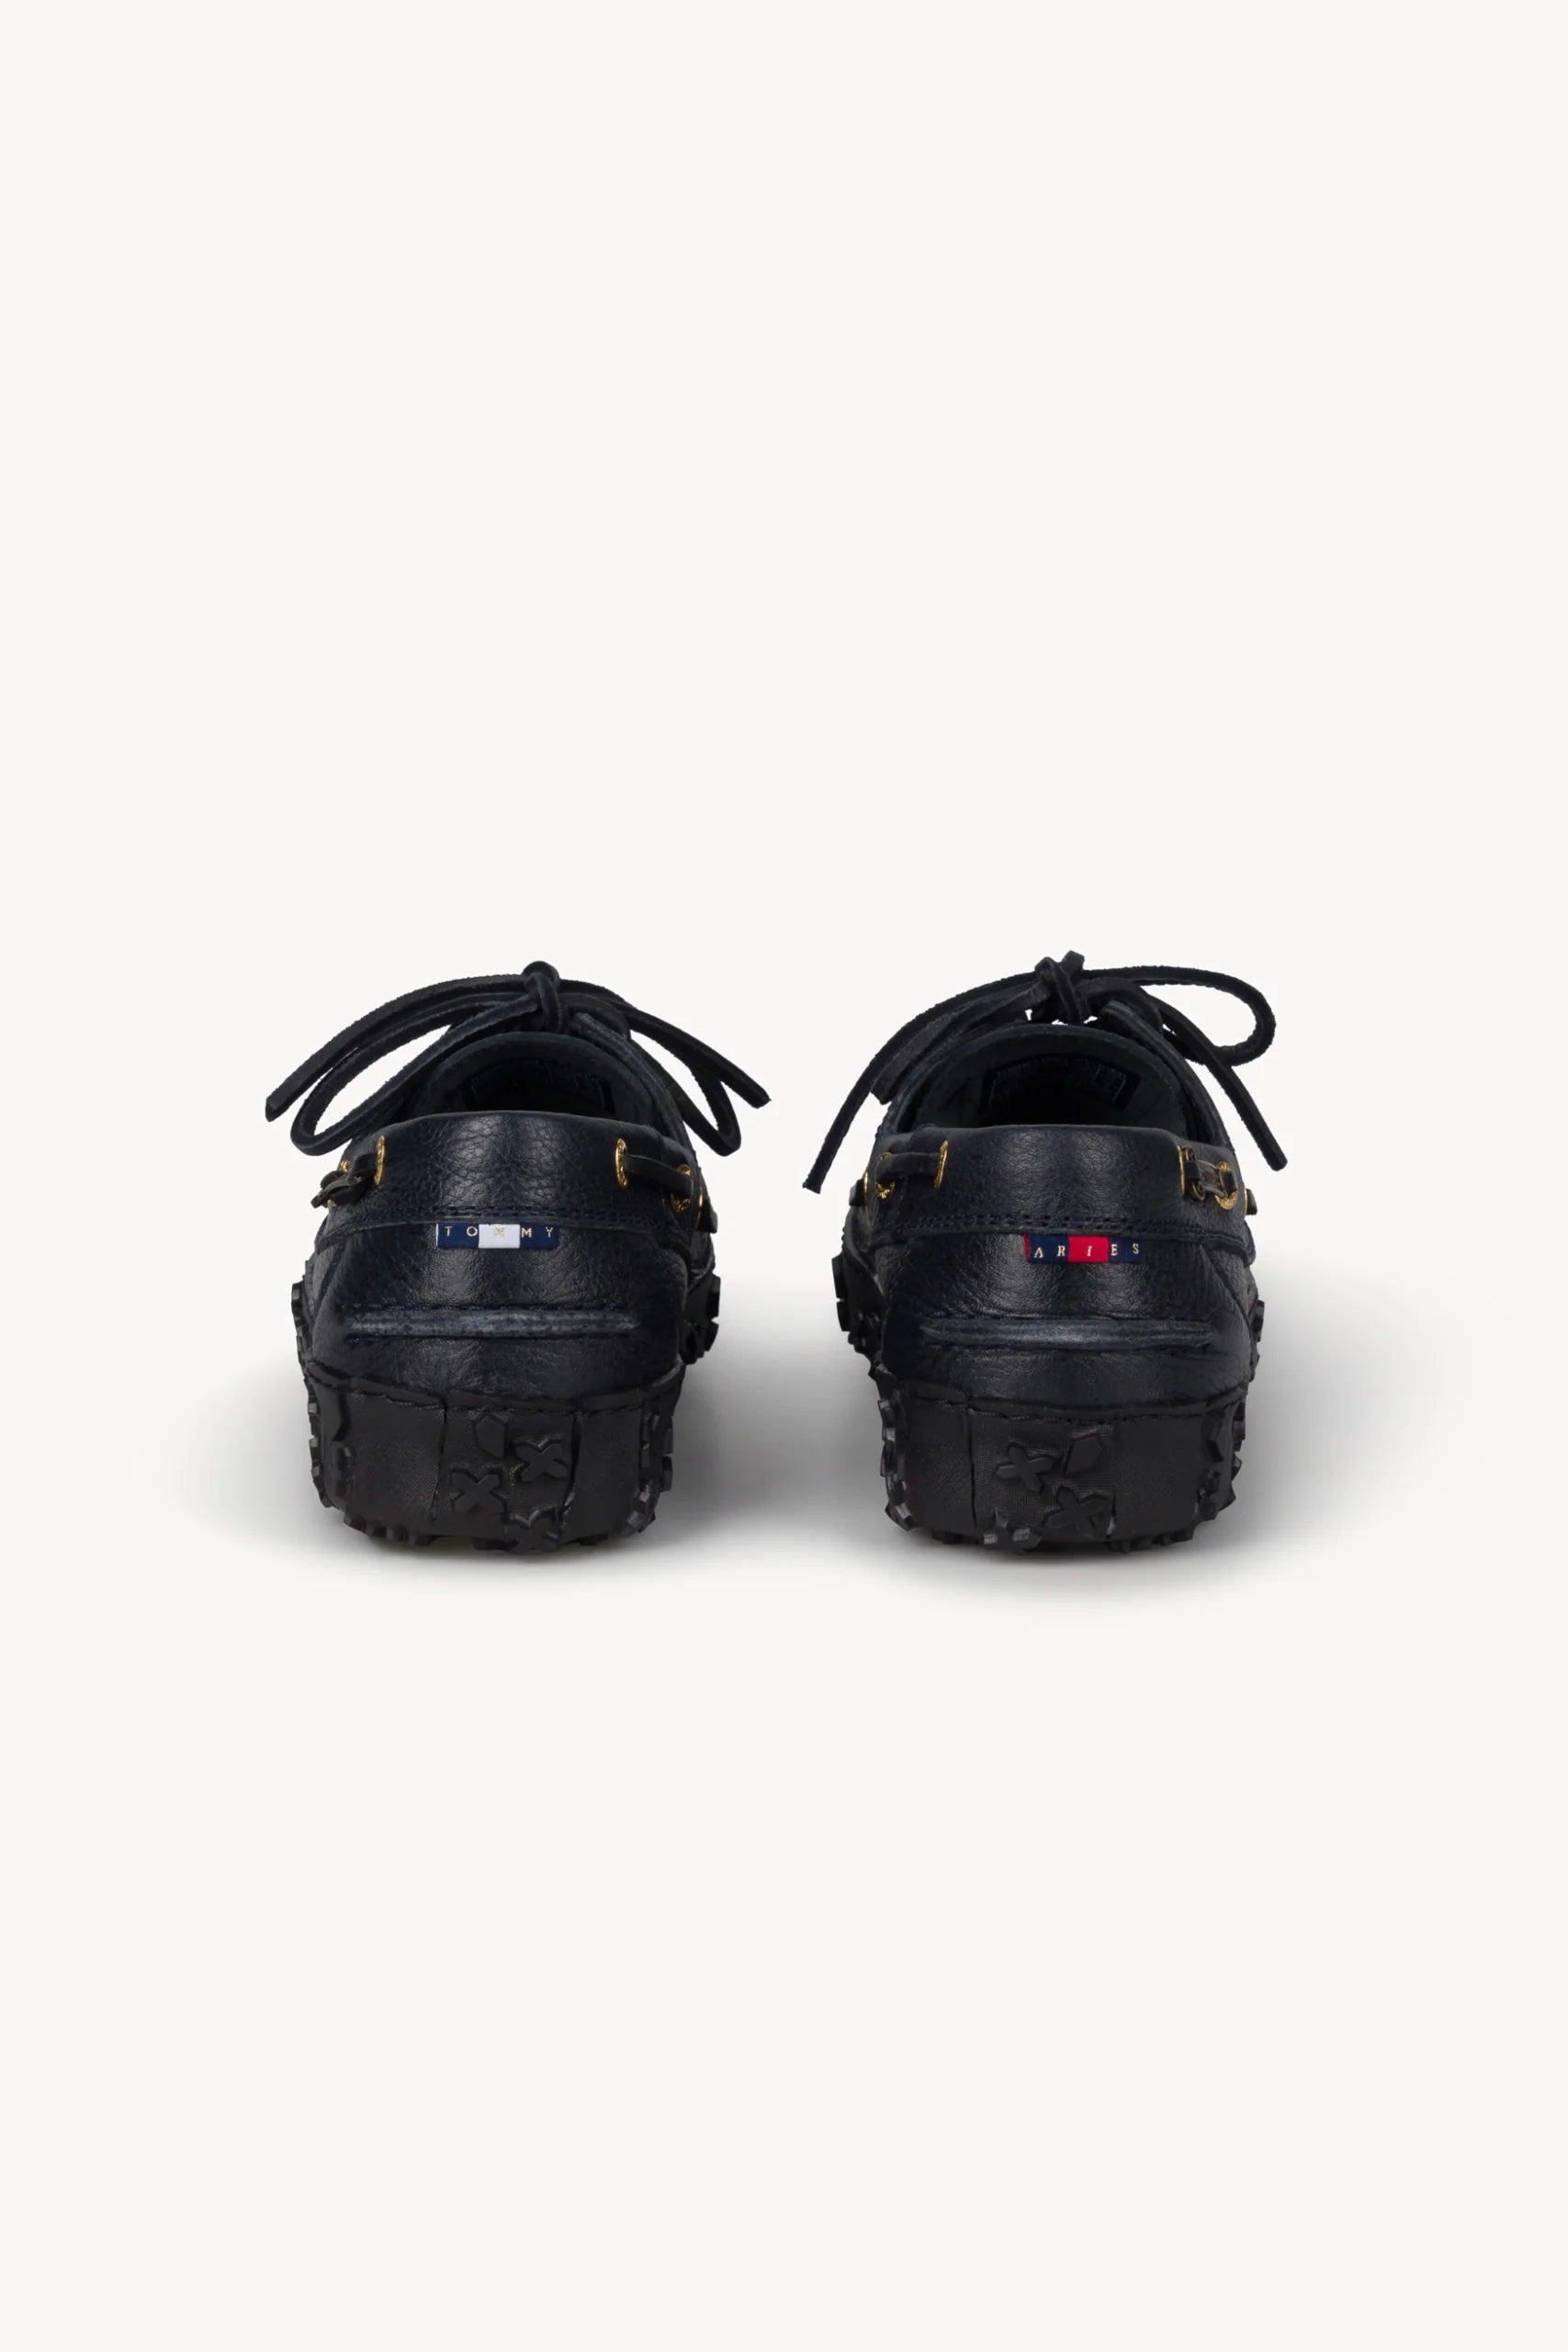 Tommy Jeans x ARIES Driver Shoe - Navy/Black - SUPERCONSCIOUS BERLIN